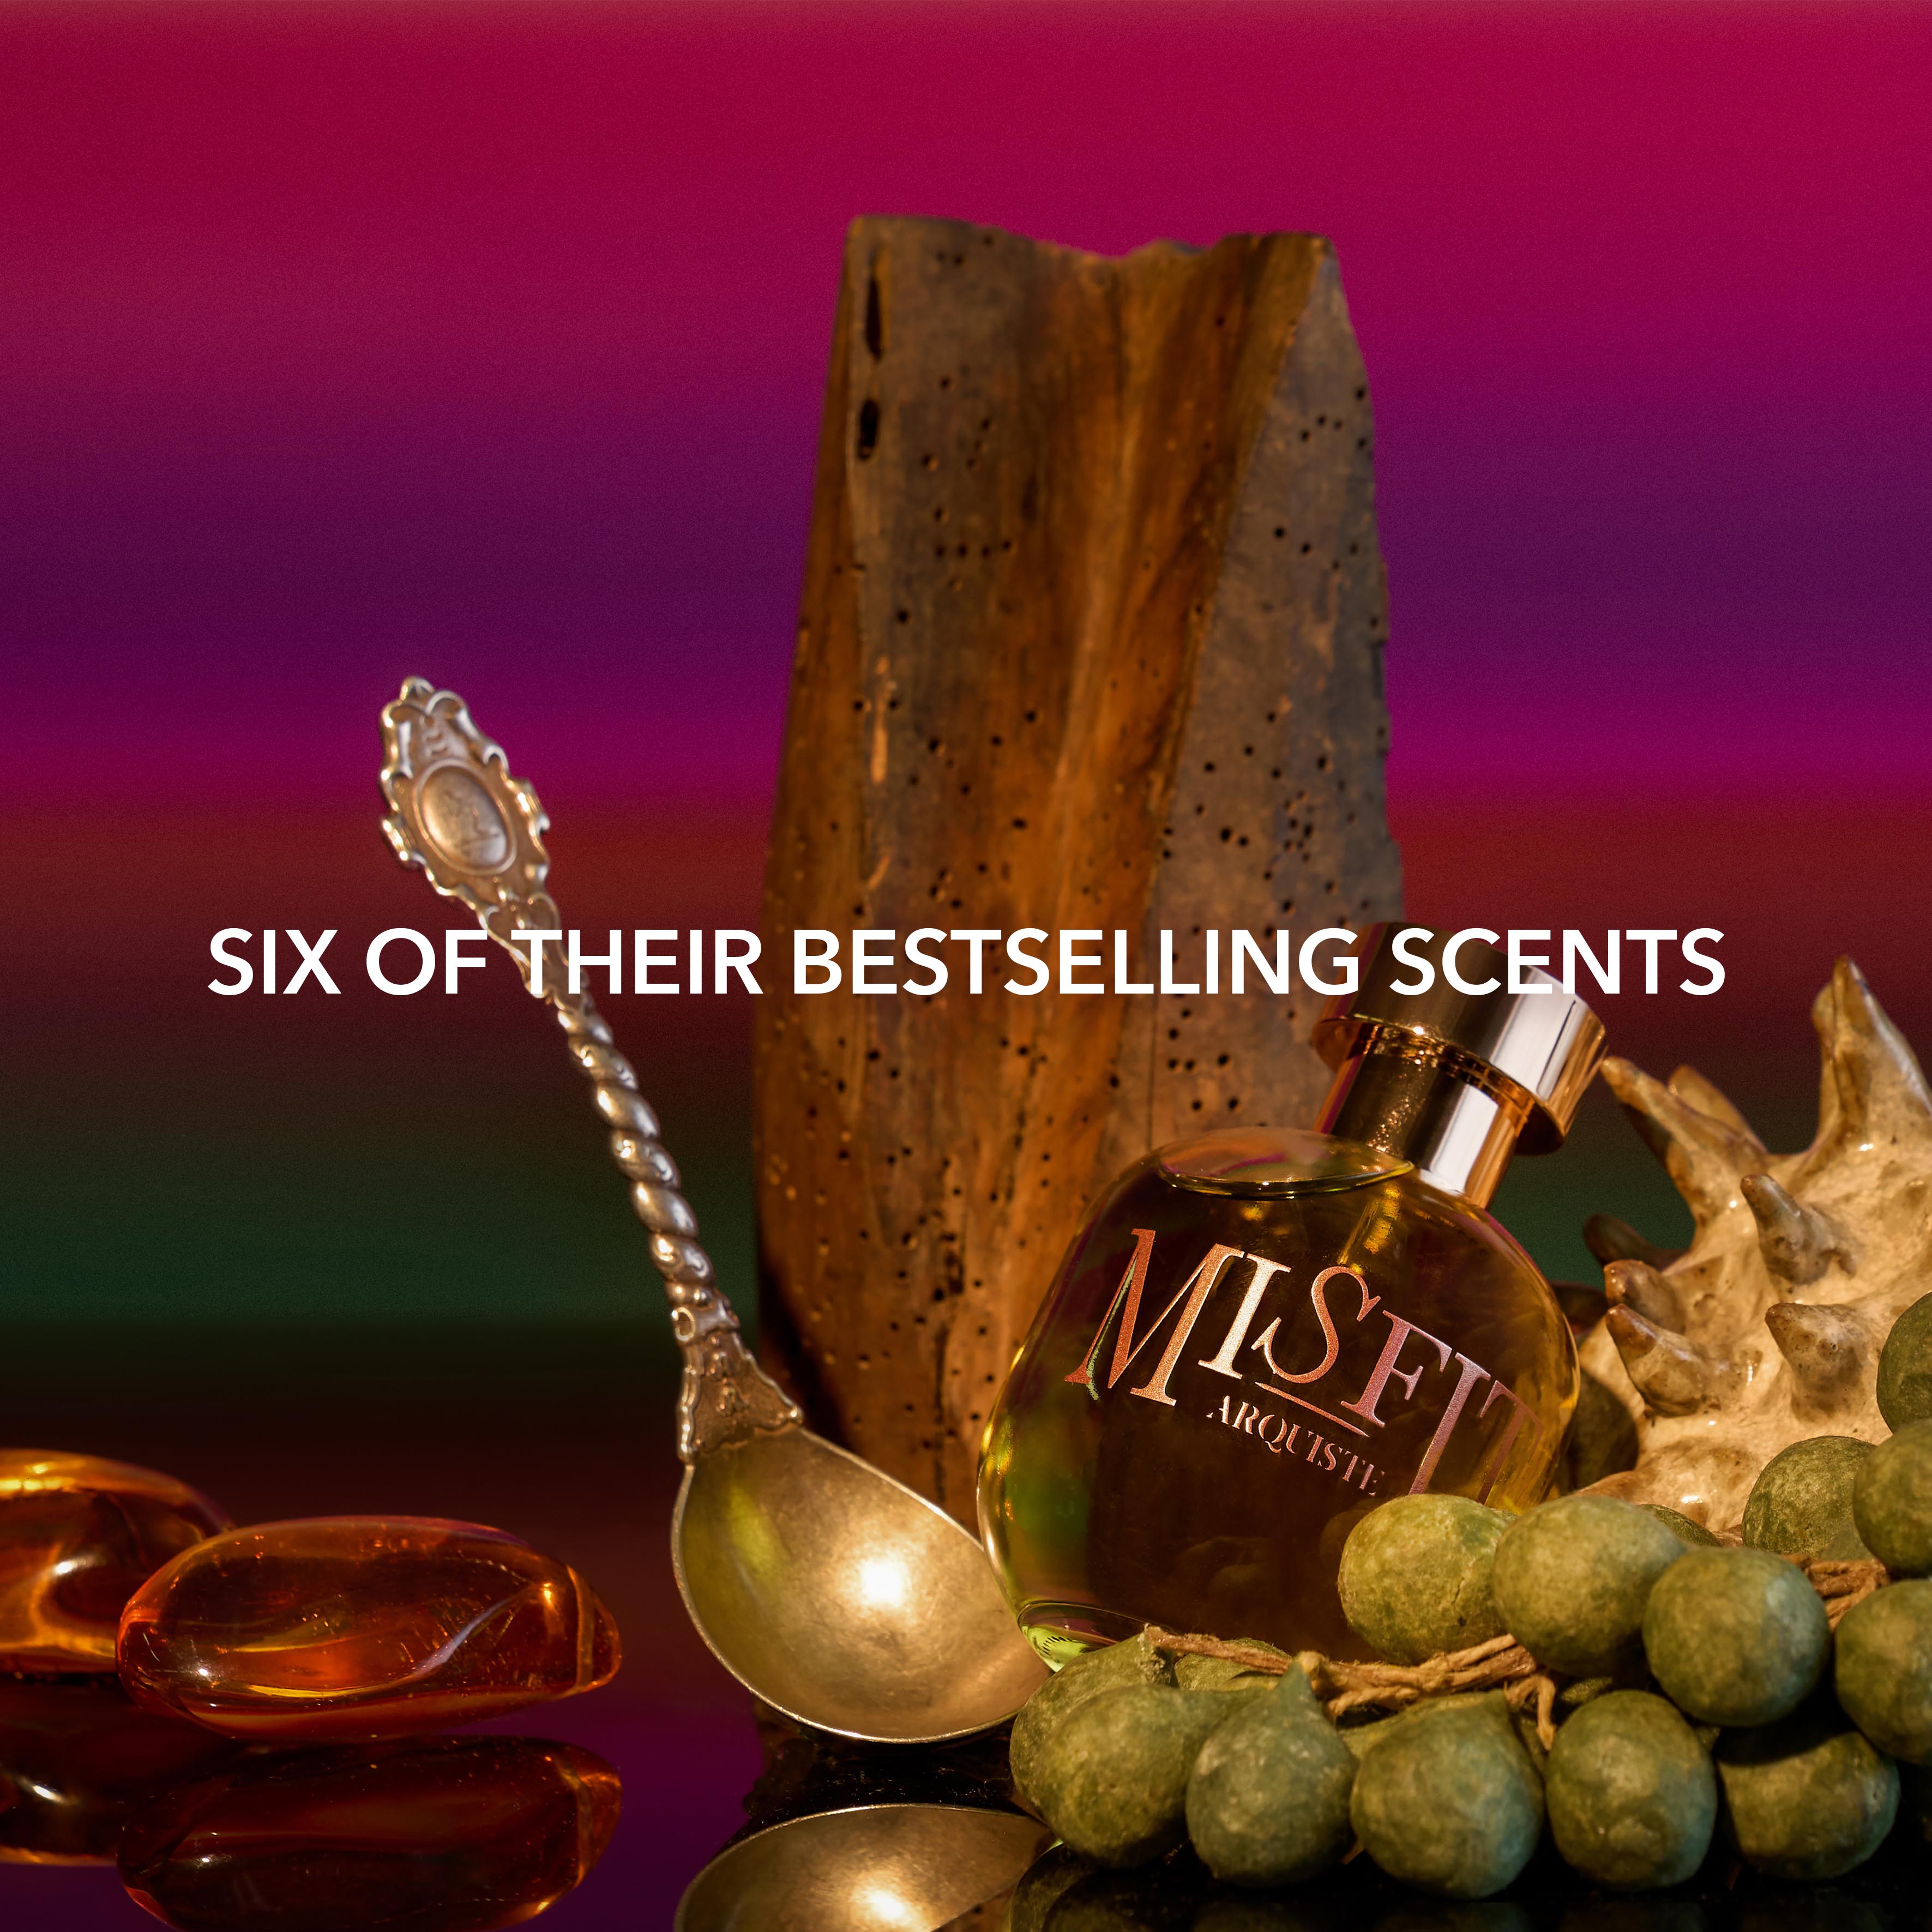 Six of their bestselling scents